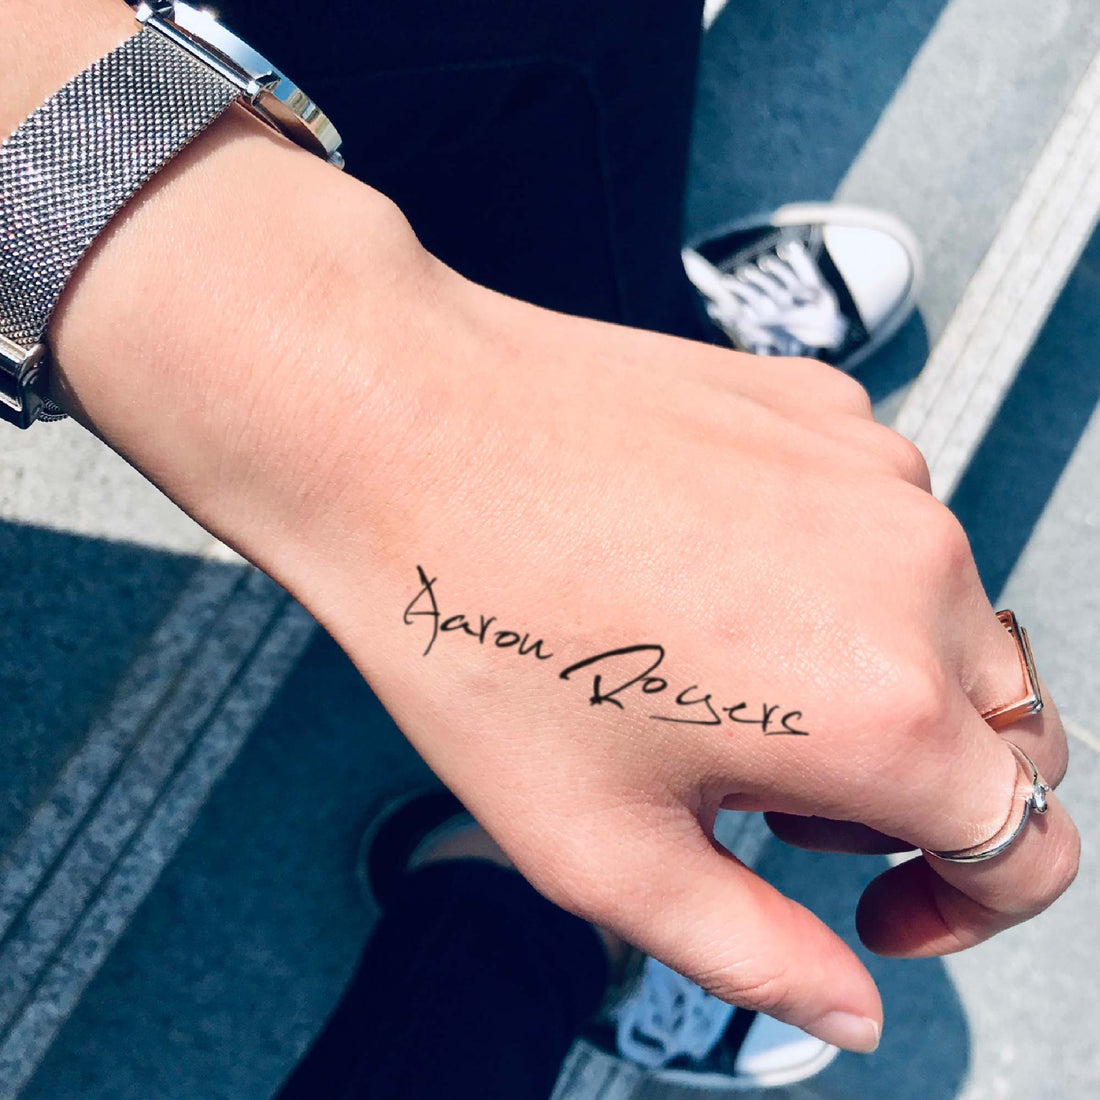 Aaron Rogers custom temporary tattoo sticker design idea inspiration meanings removal arm wrist hand words font name signature calligraphy lyrics tour concert outfits merch accessory gift souvenir costumes wear dress up code